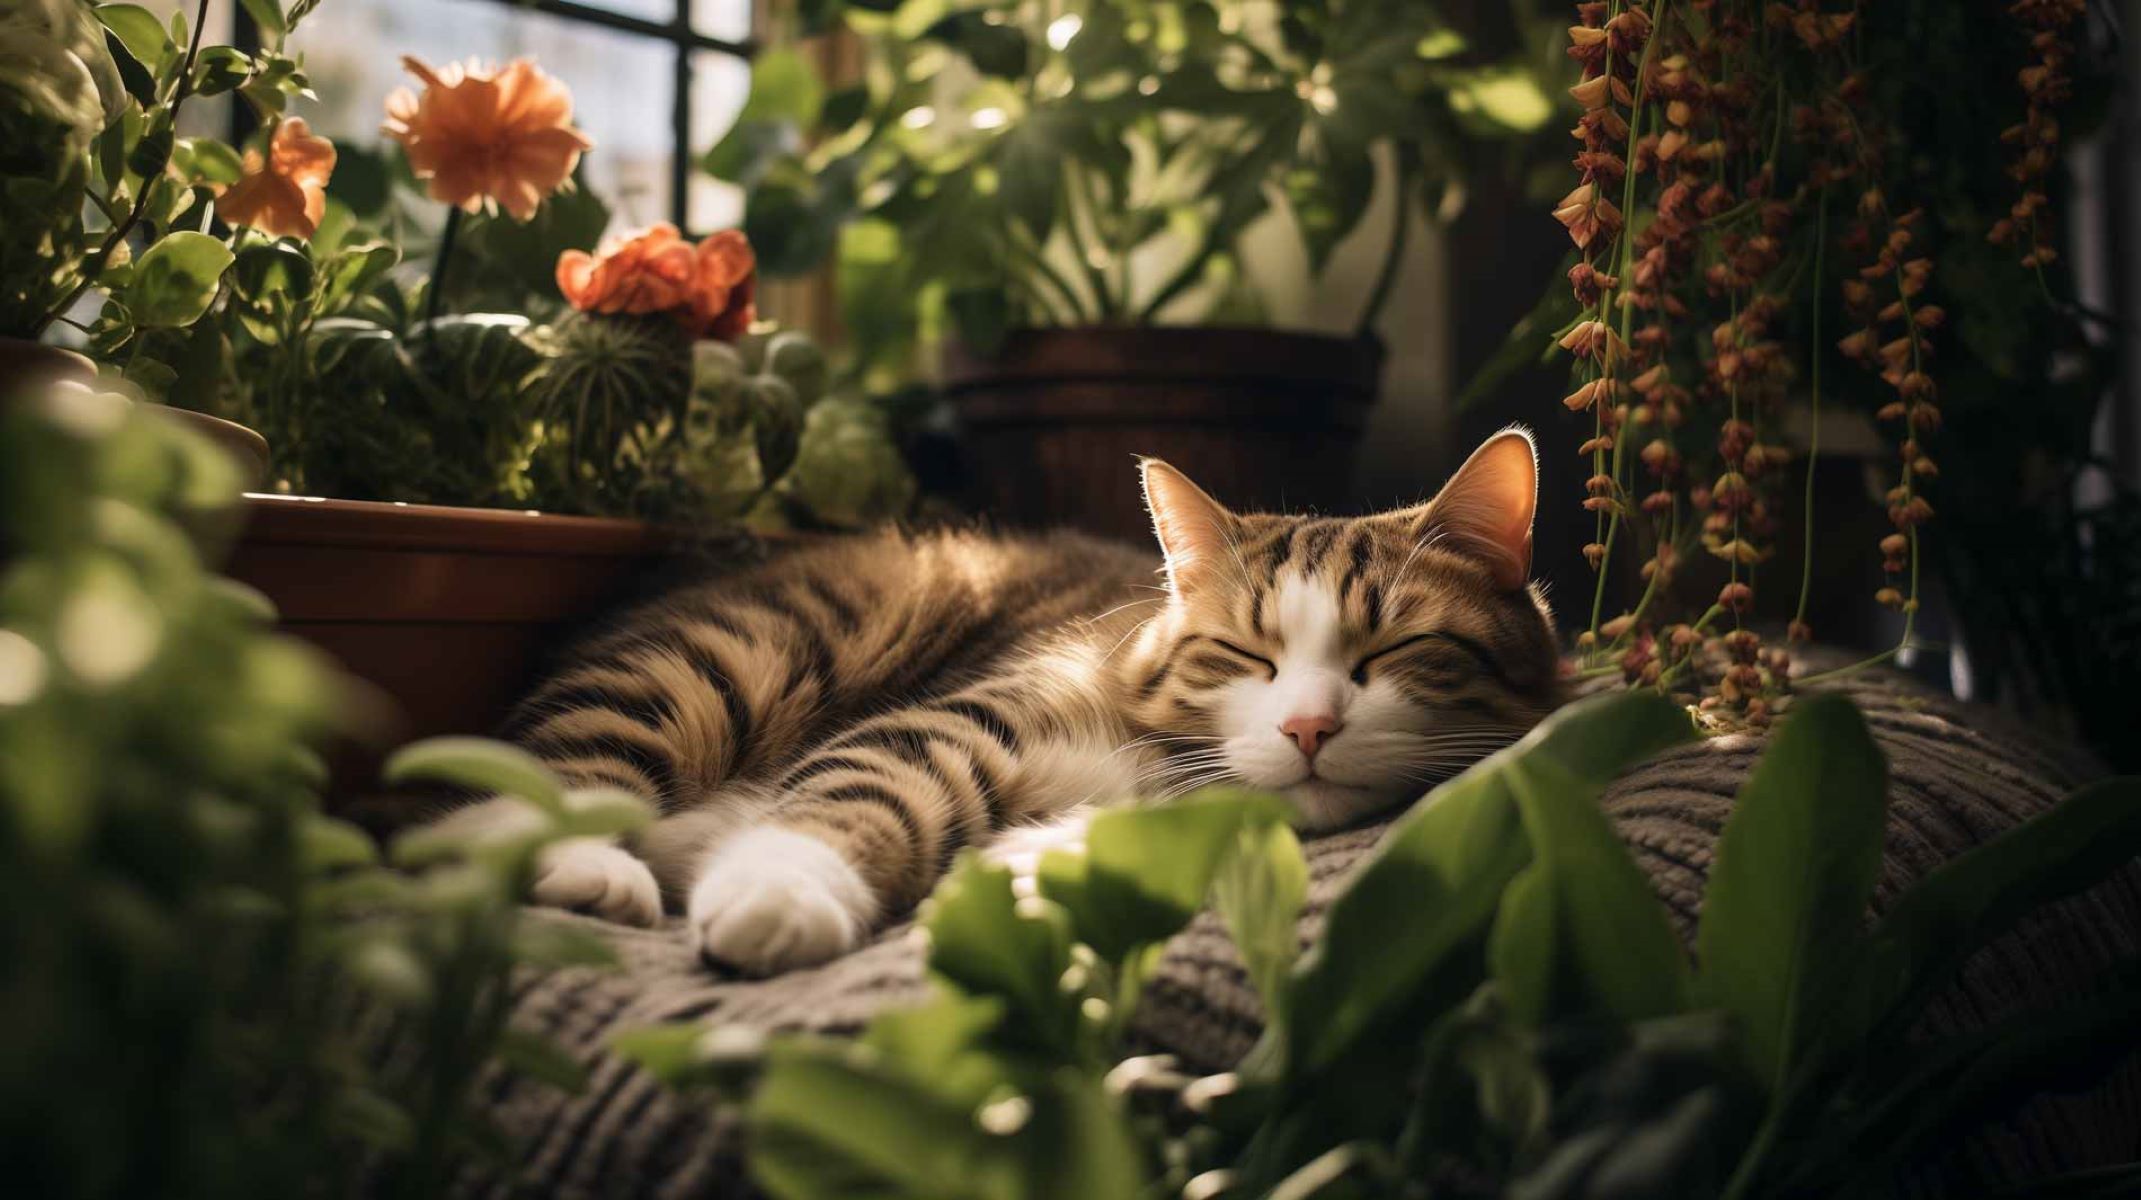 10 Deadly Flowers That Could Harm Your Cat!